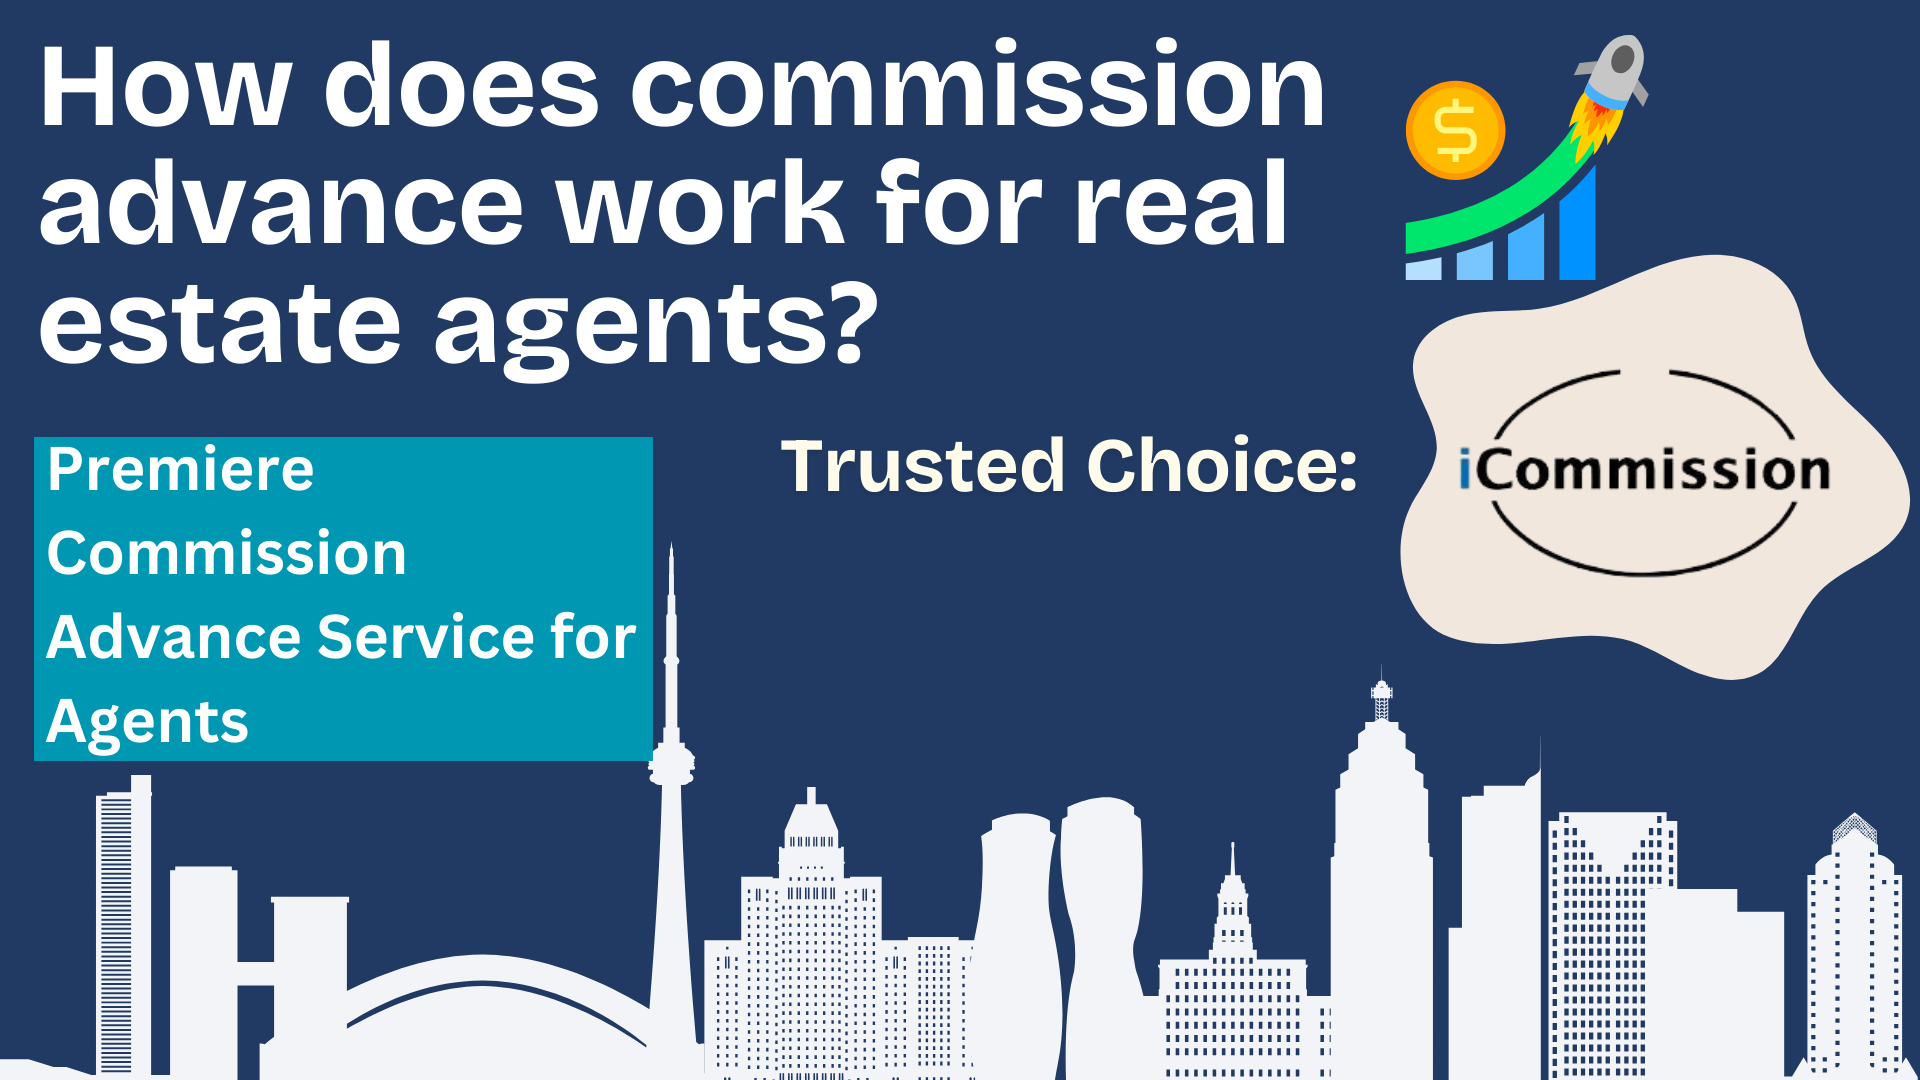 How does commission advance work for real estate agents?